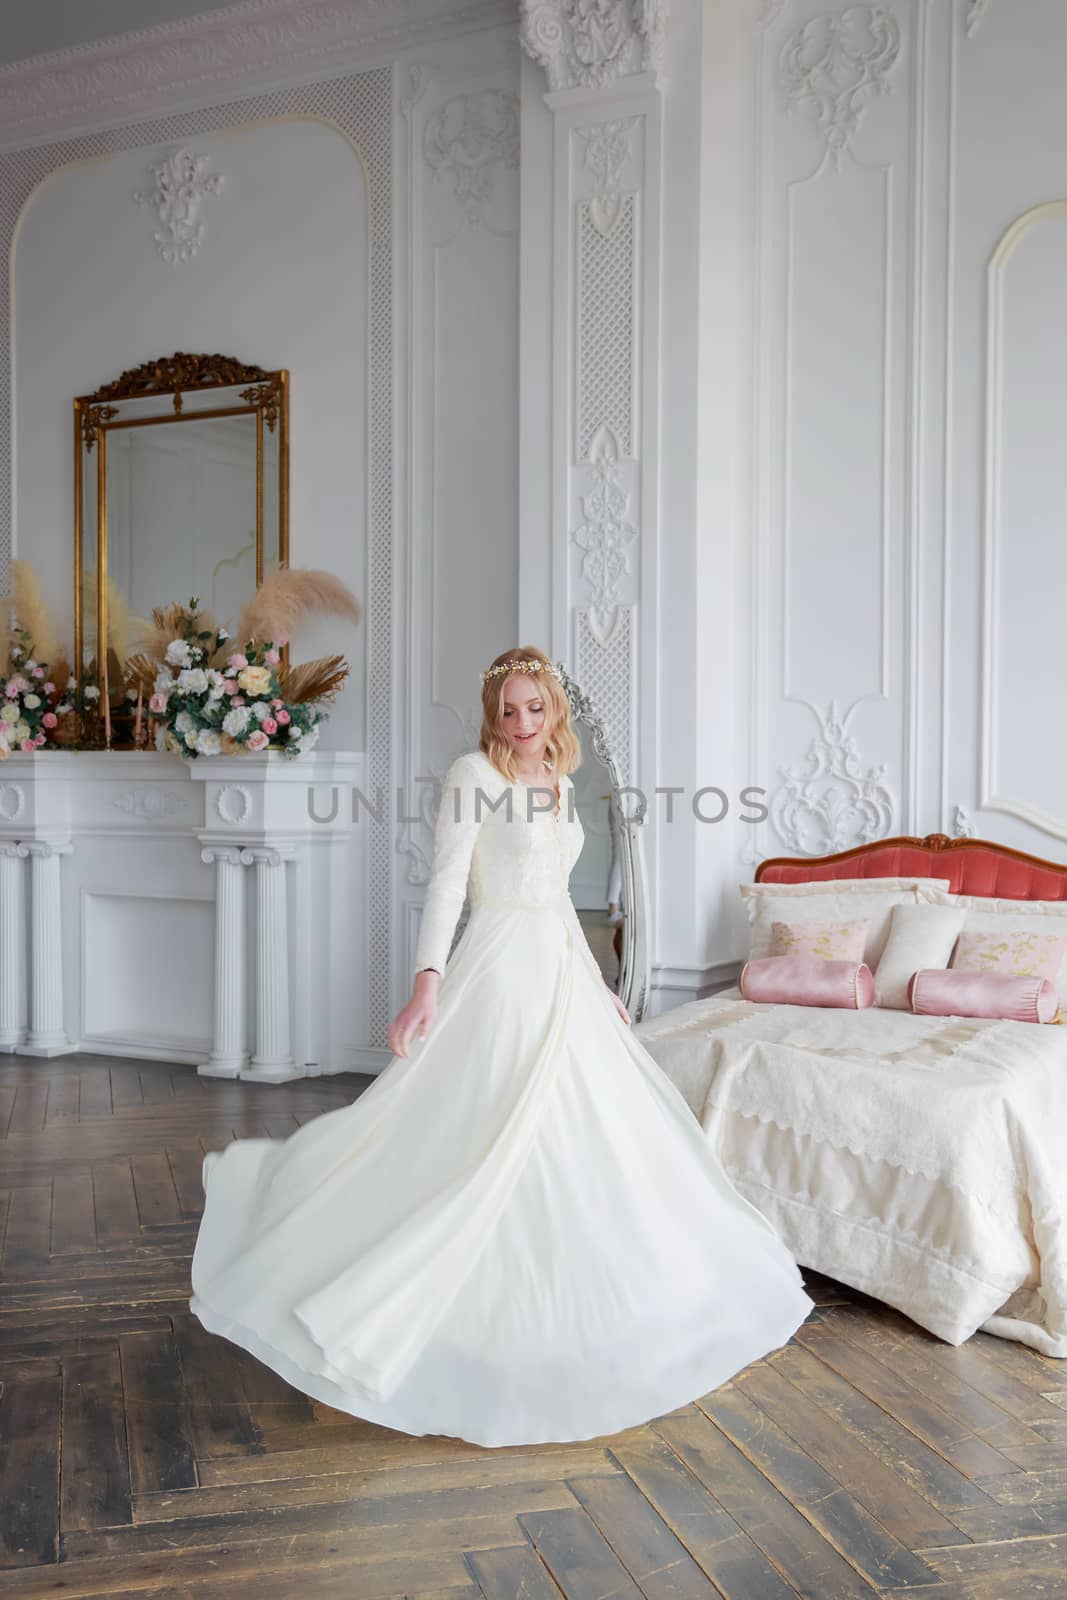 Full-length portrait of a bride in a beautiful wedding dress in the interior. by galinasharapova